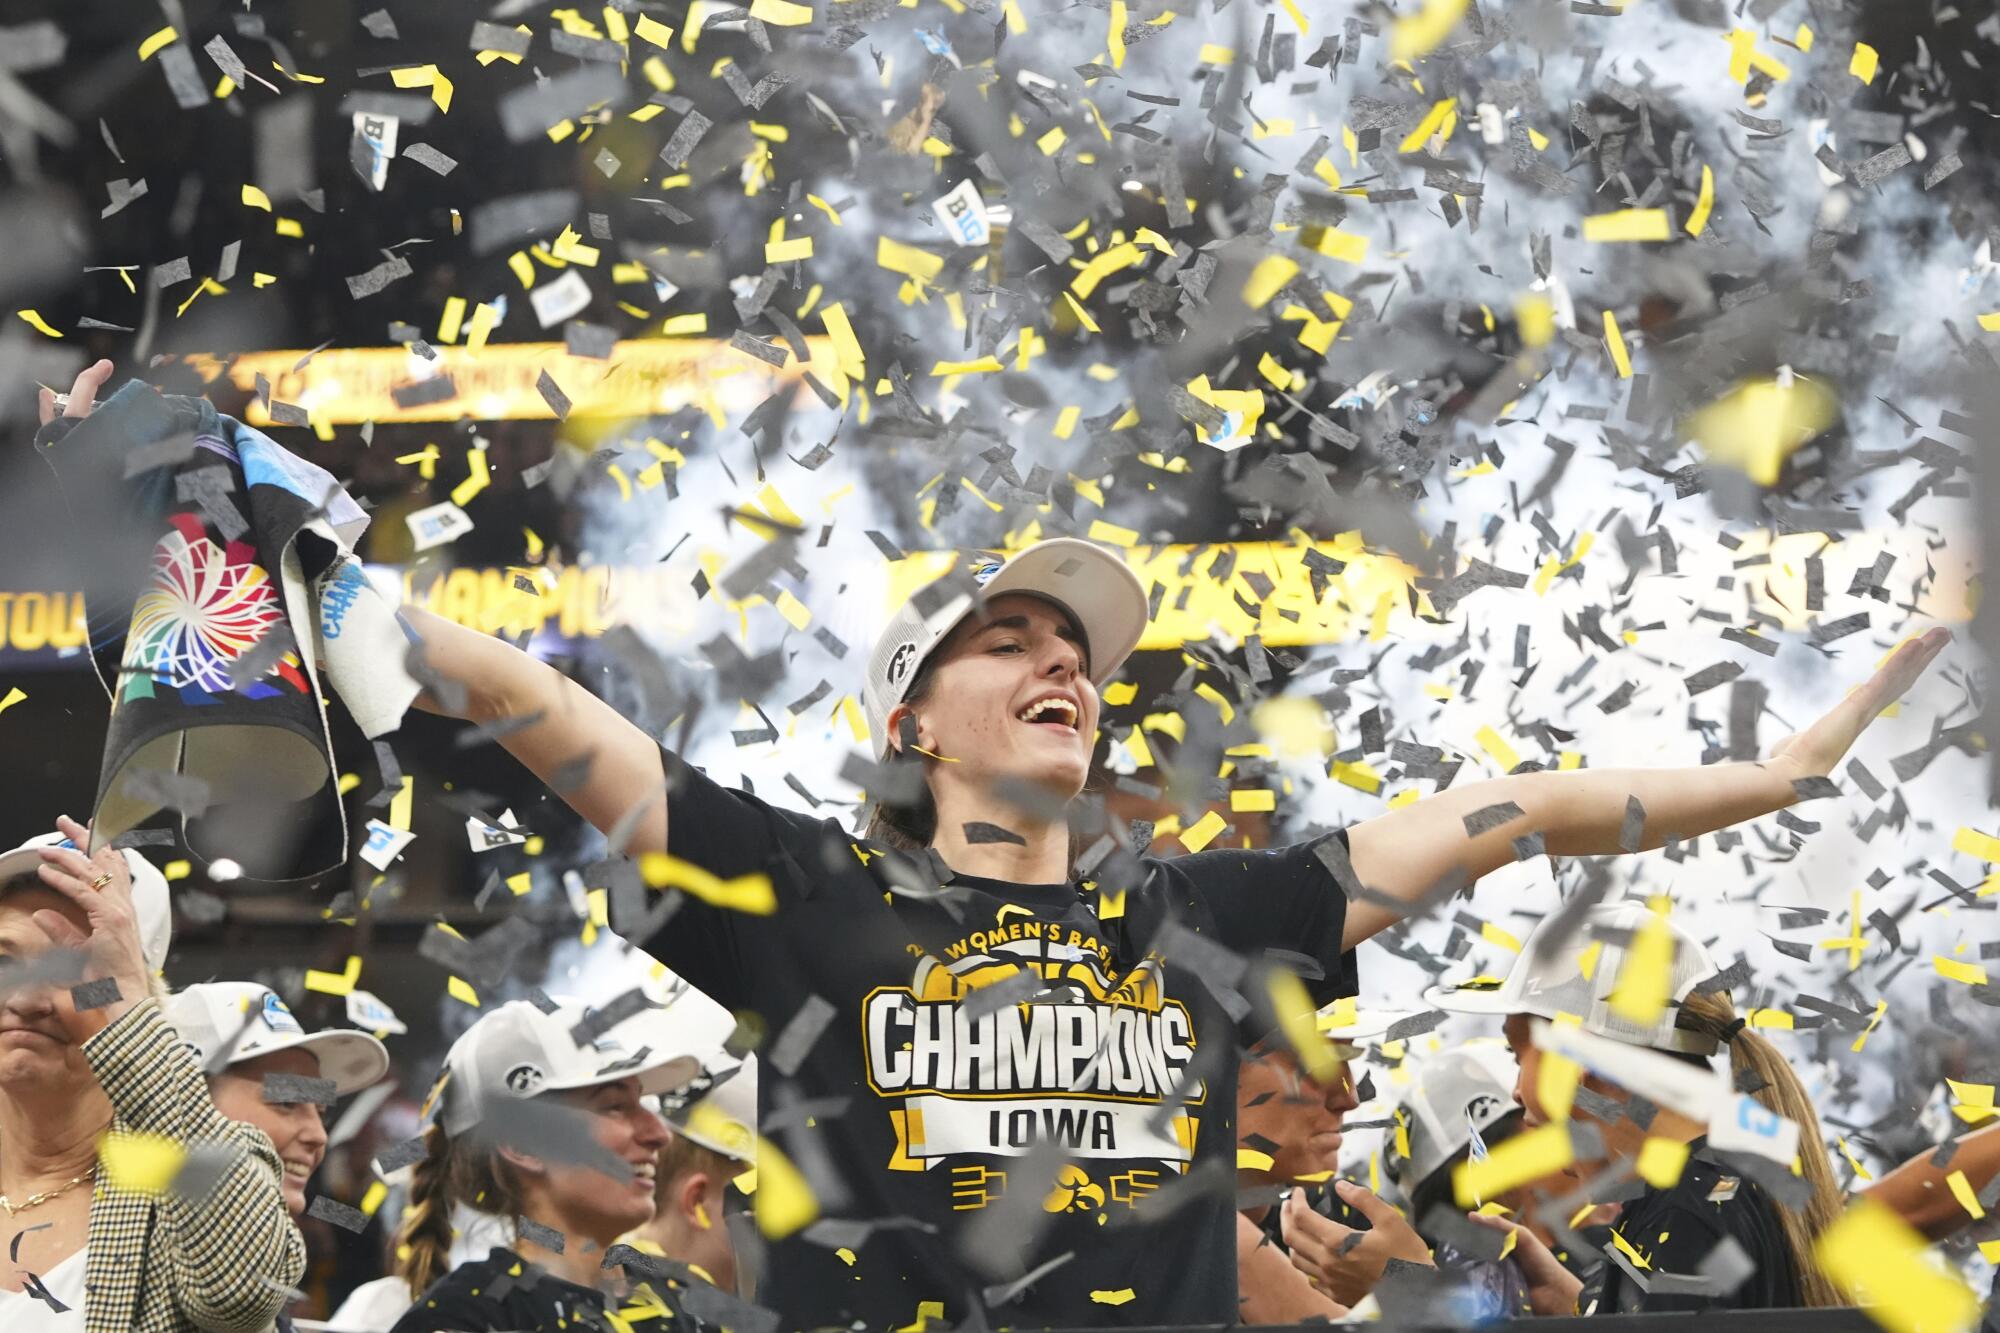 Iowa guard Caitlin Clark closes her eyes with her arms outstretched as confetti falls on the basketball court.